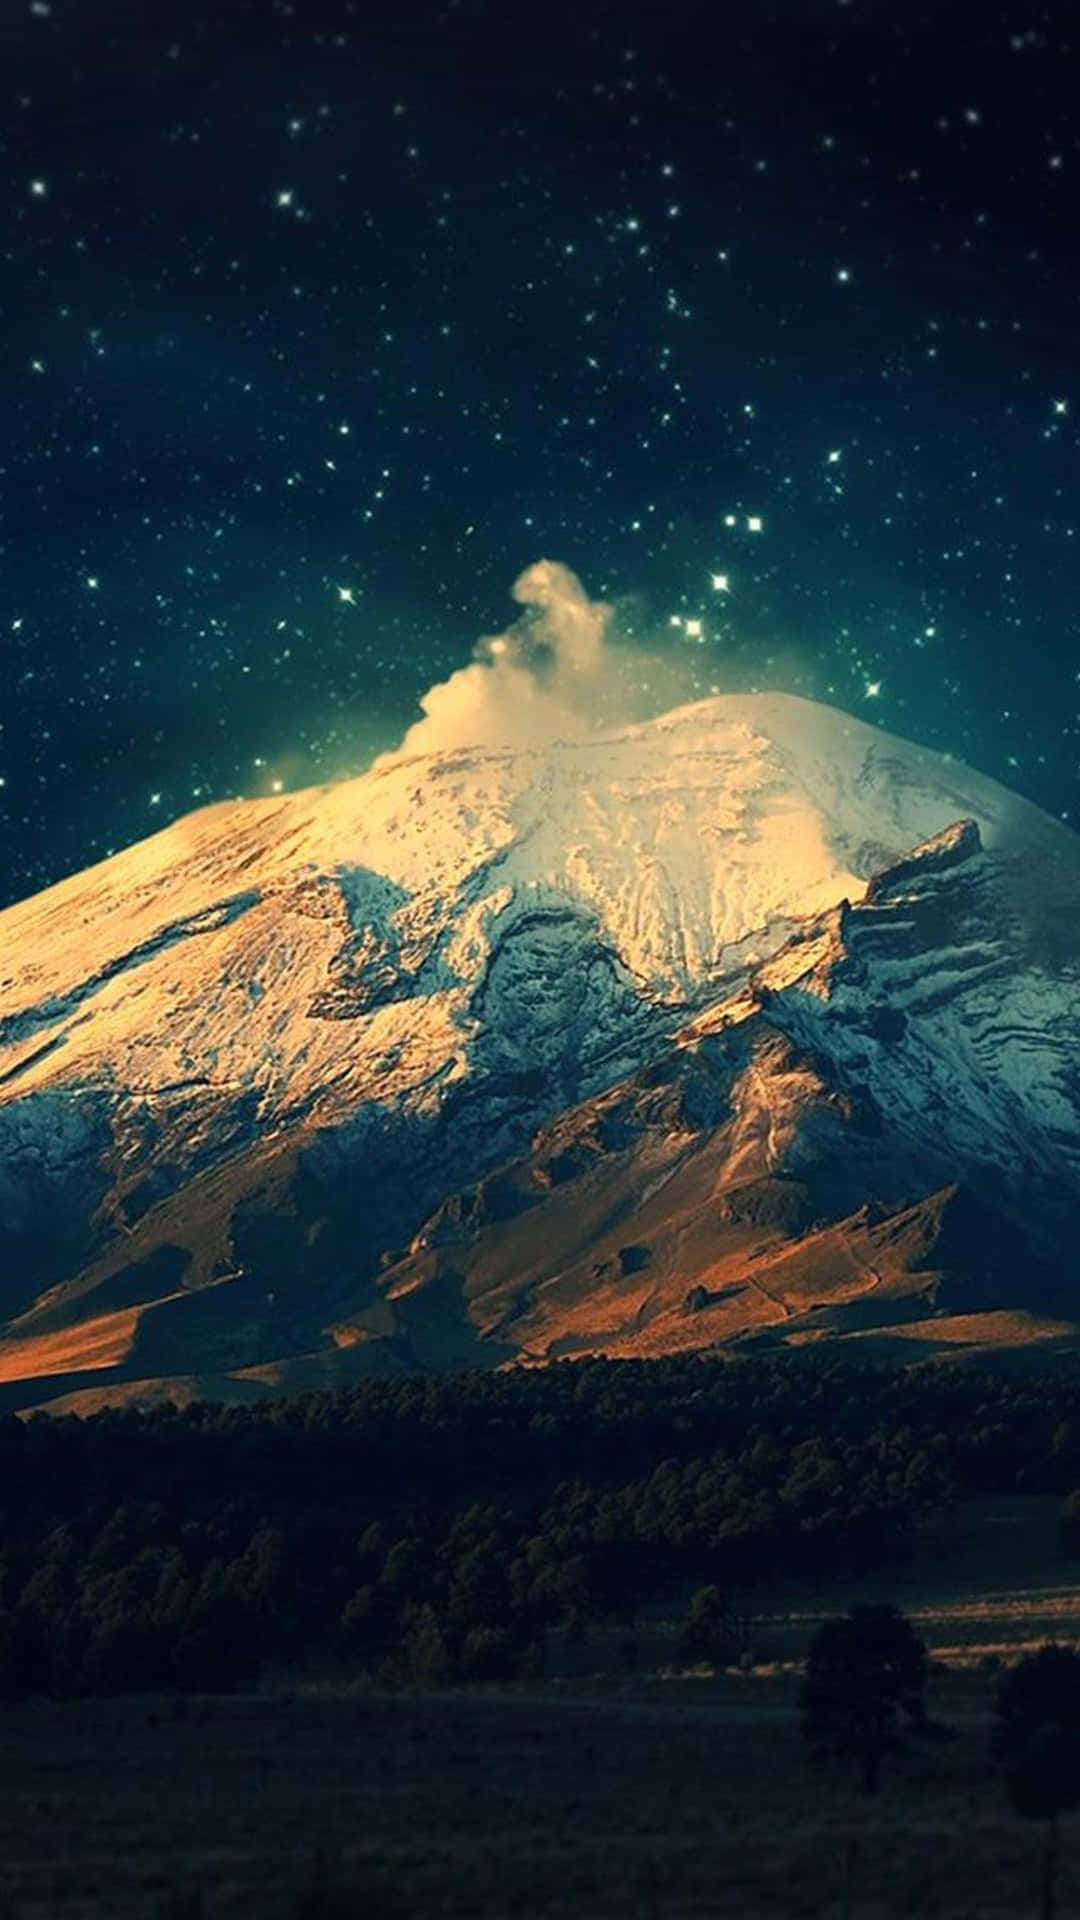 A Mountain Covered In Snow Under The Stars Wallpaper